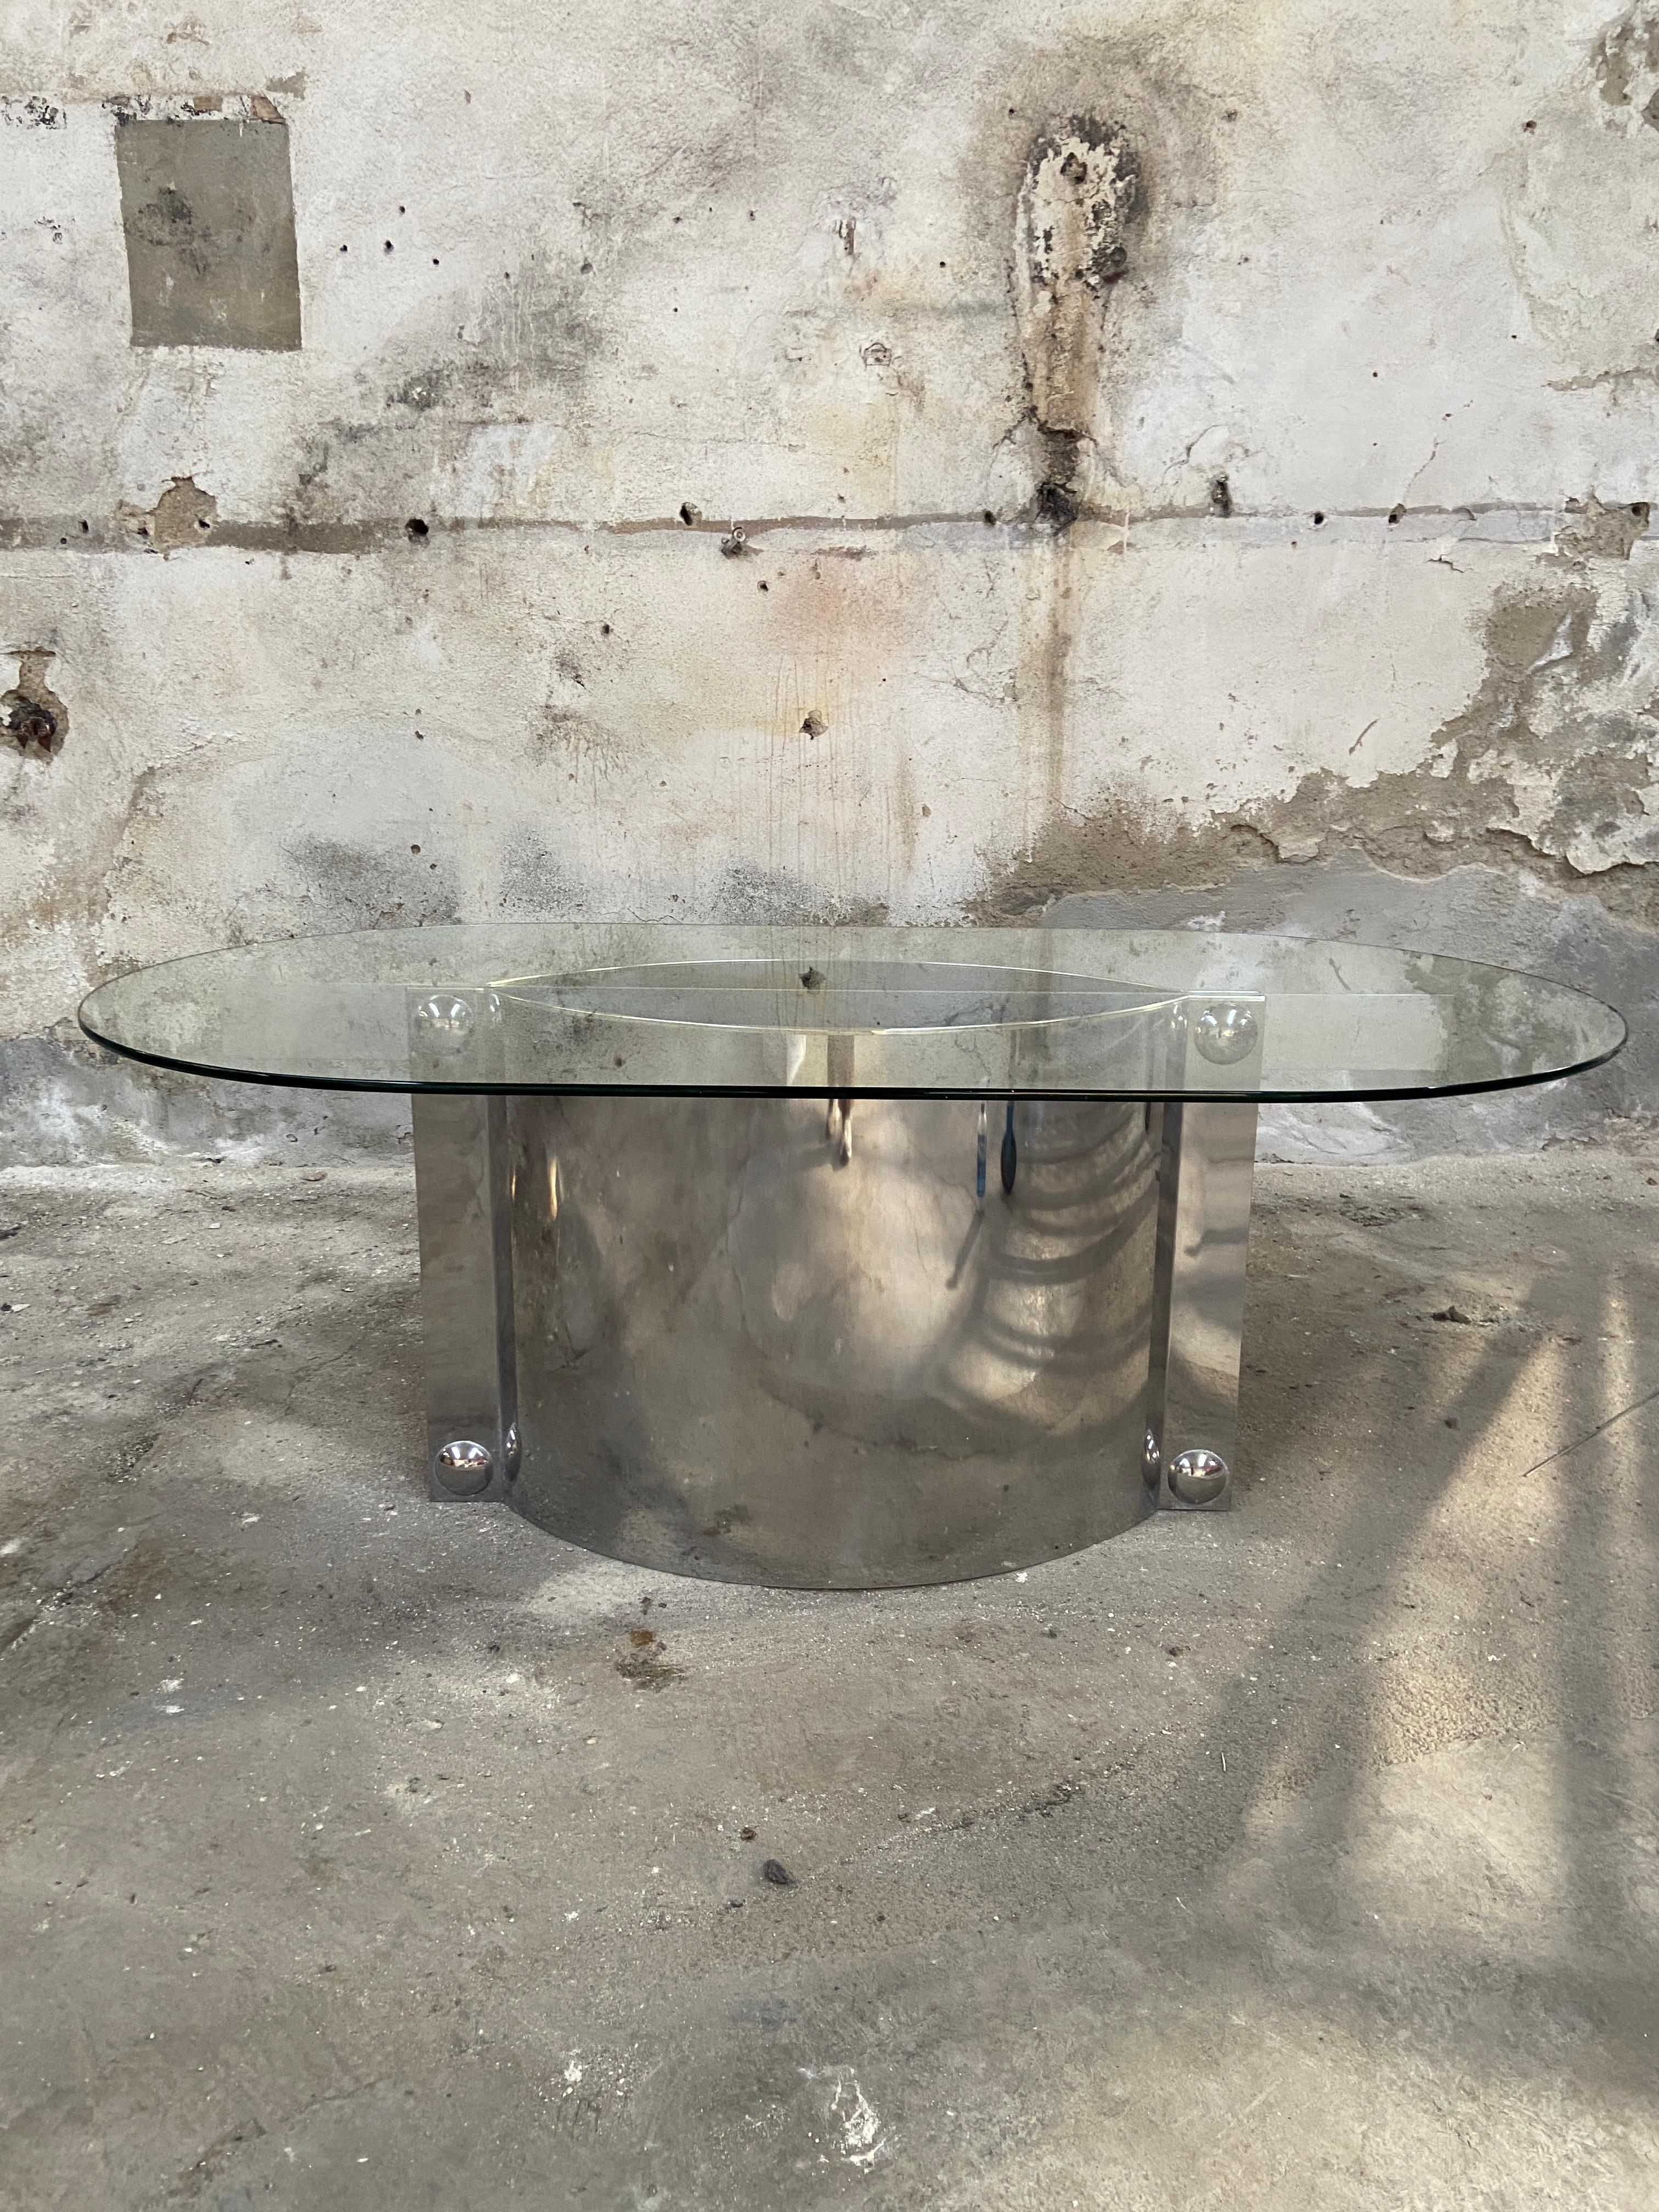 Mid-Century Modern Italian oval shaped glass table with stainless still pedestal by Vittorio Introini.
The table is in really good vintage conditions.